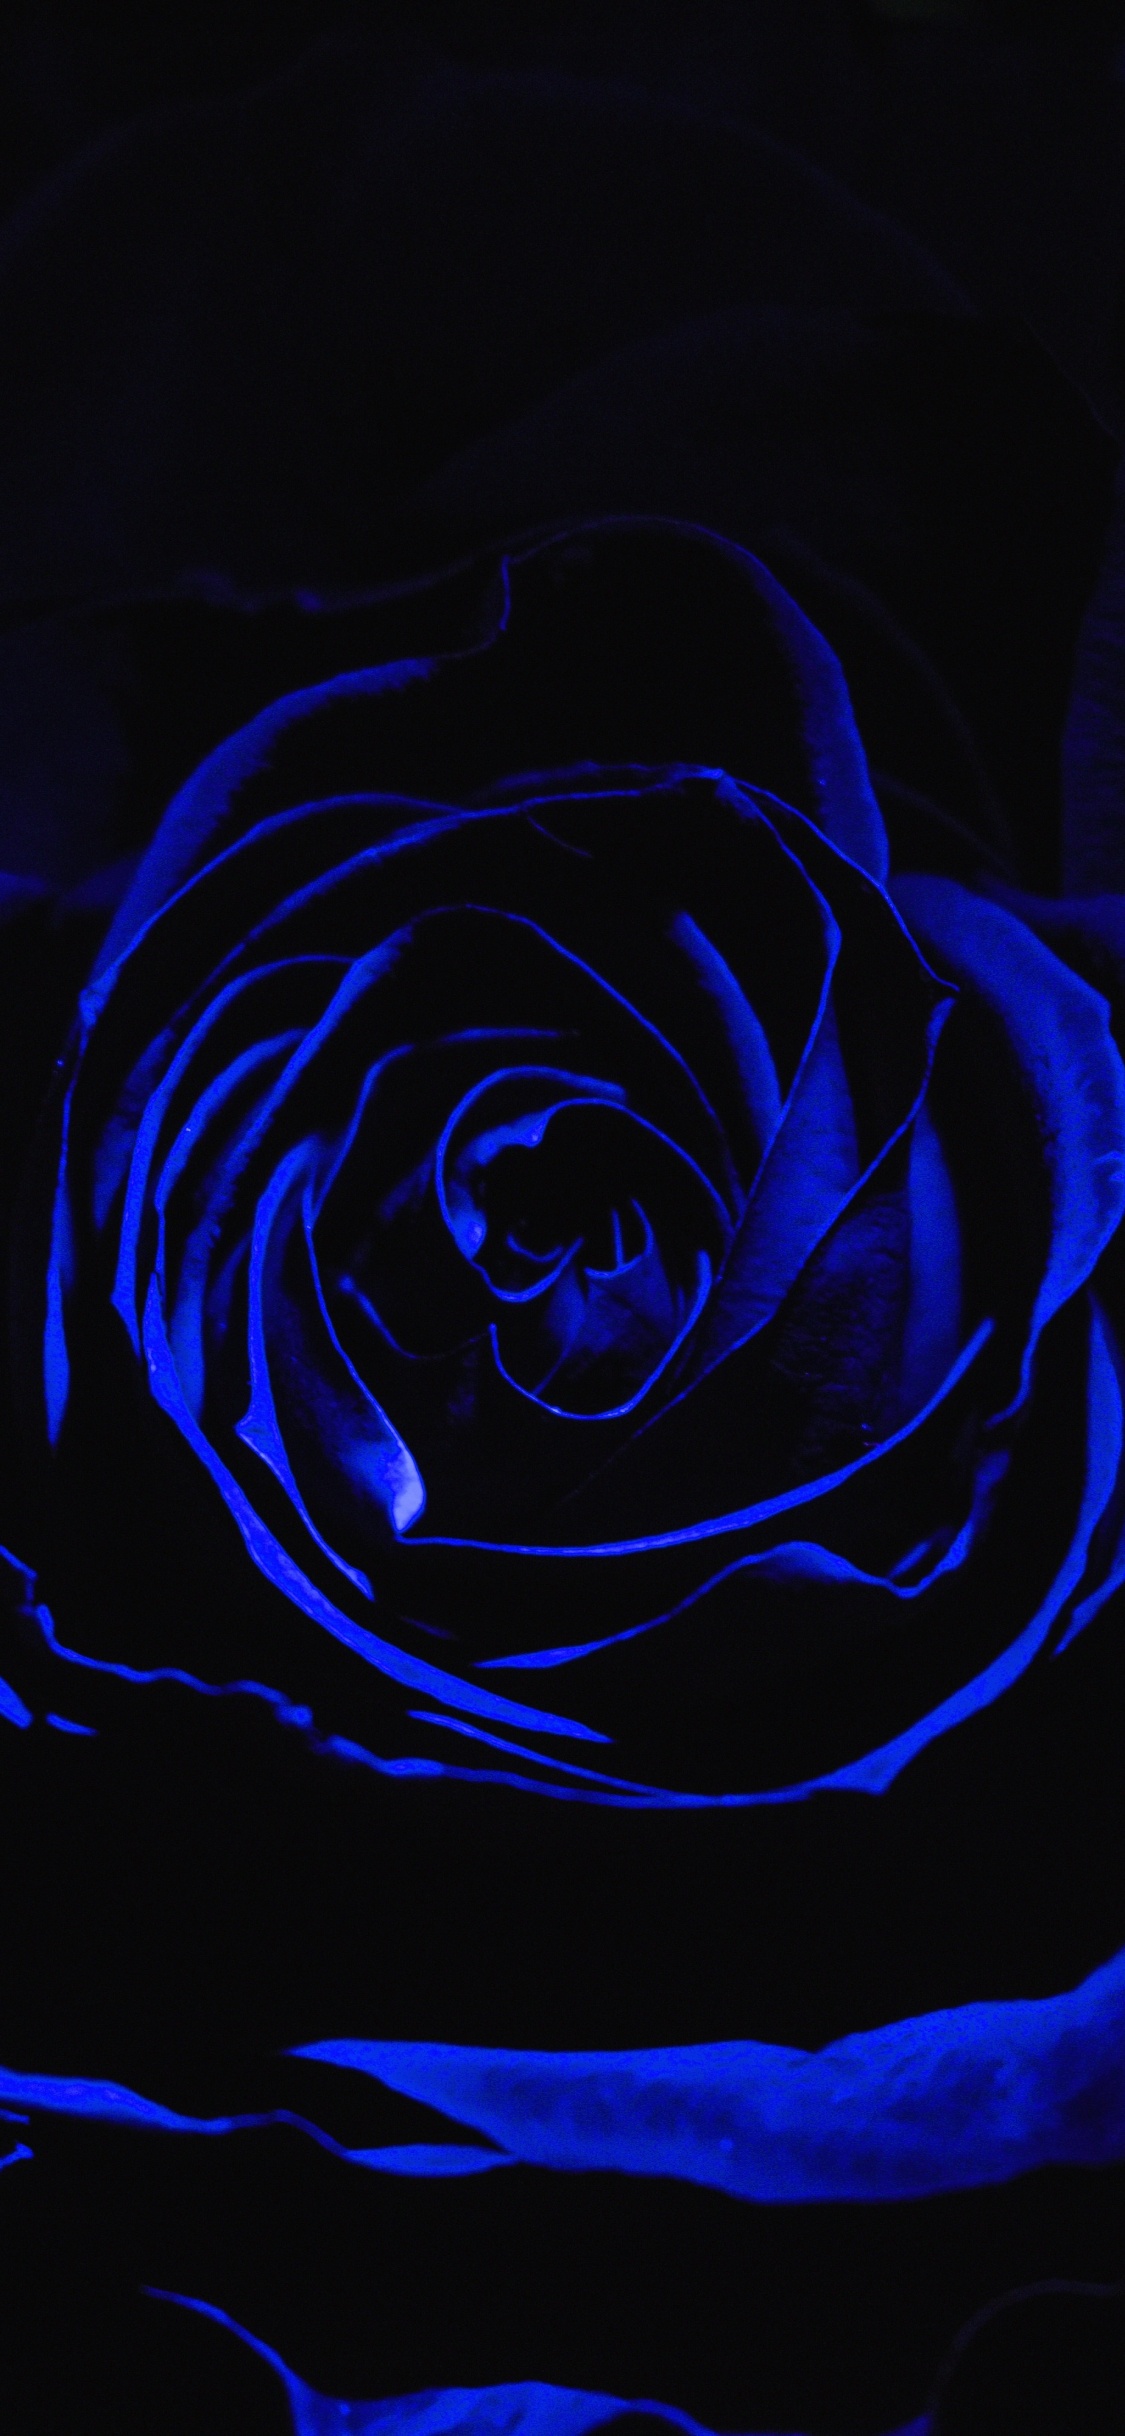 Blue Rose in Close up Photography. Wallpaper in 1125x2436 Resolution